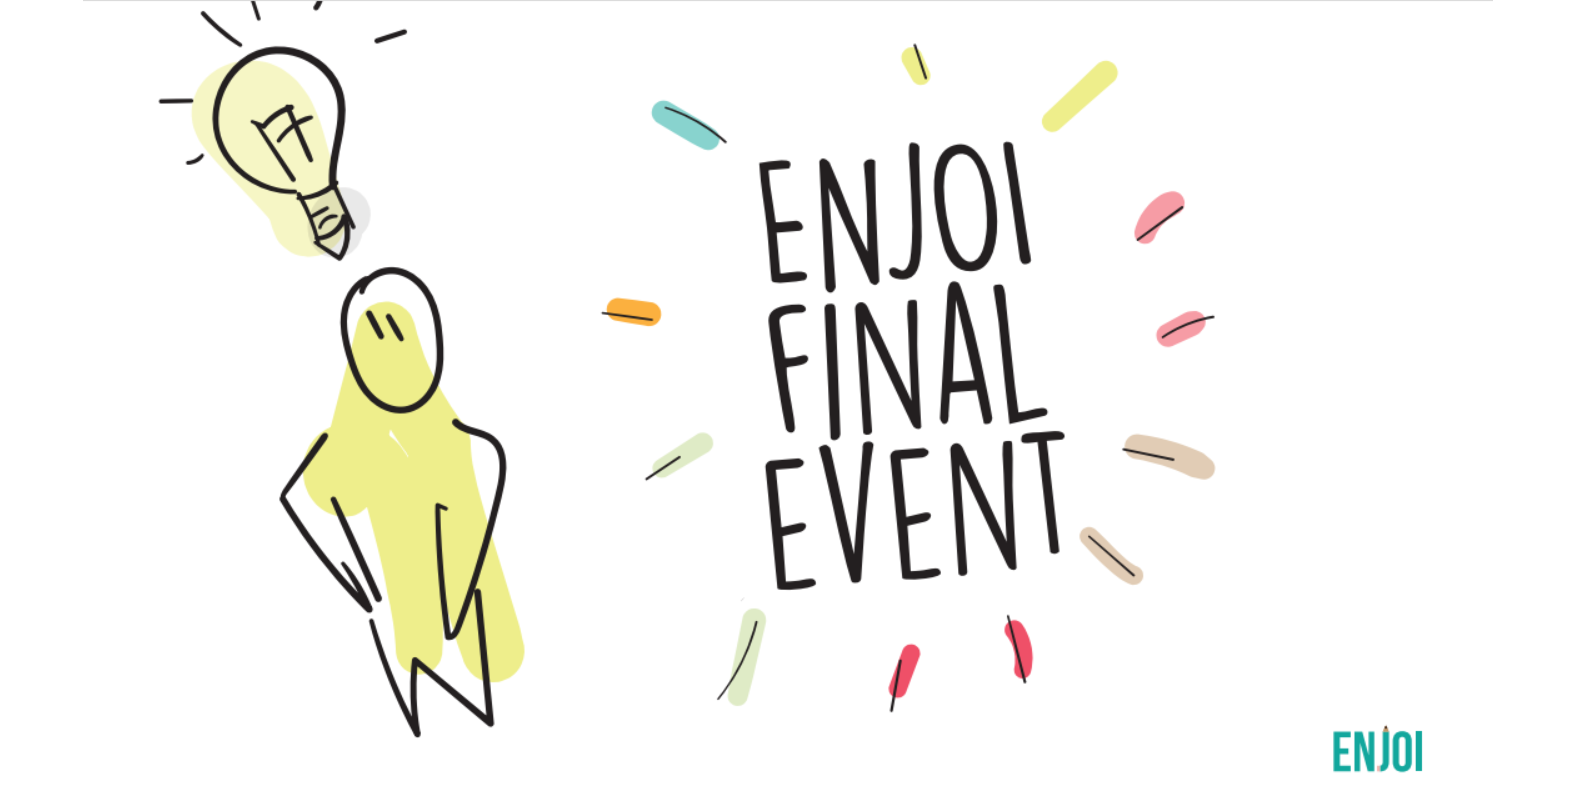 An artistic header for the ENJOI Final Event with those words displayed next to a cartoon of a human with a lightbulb above their head